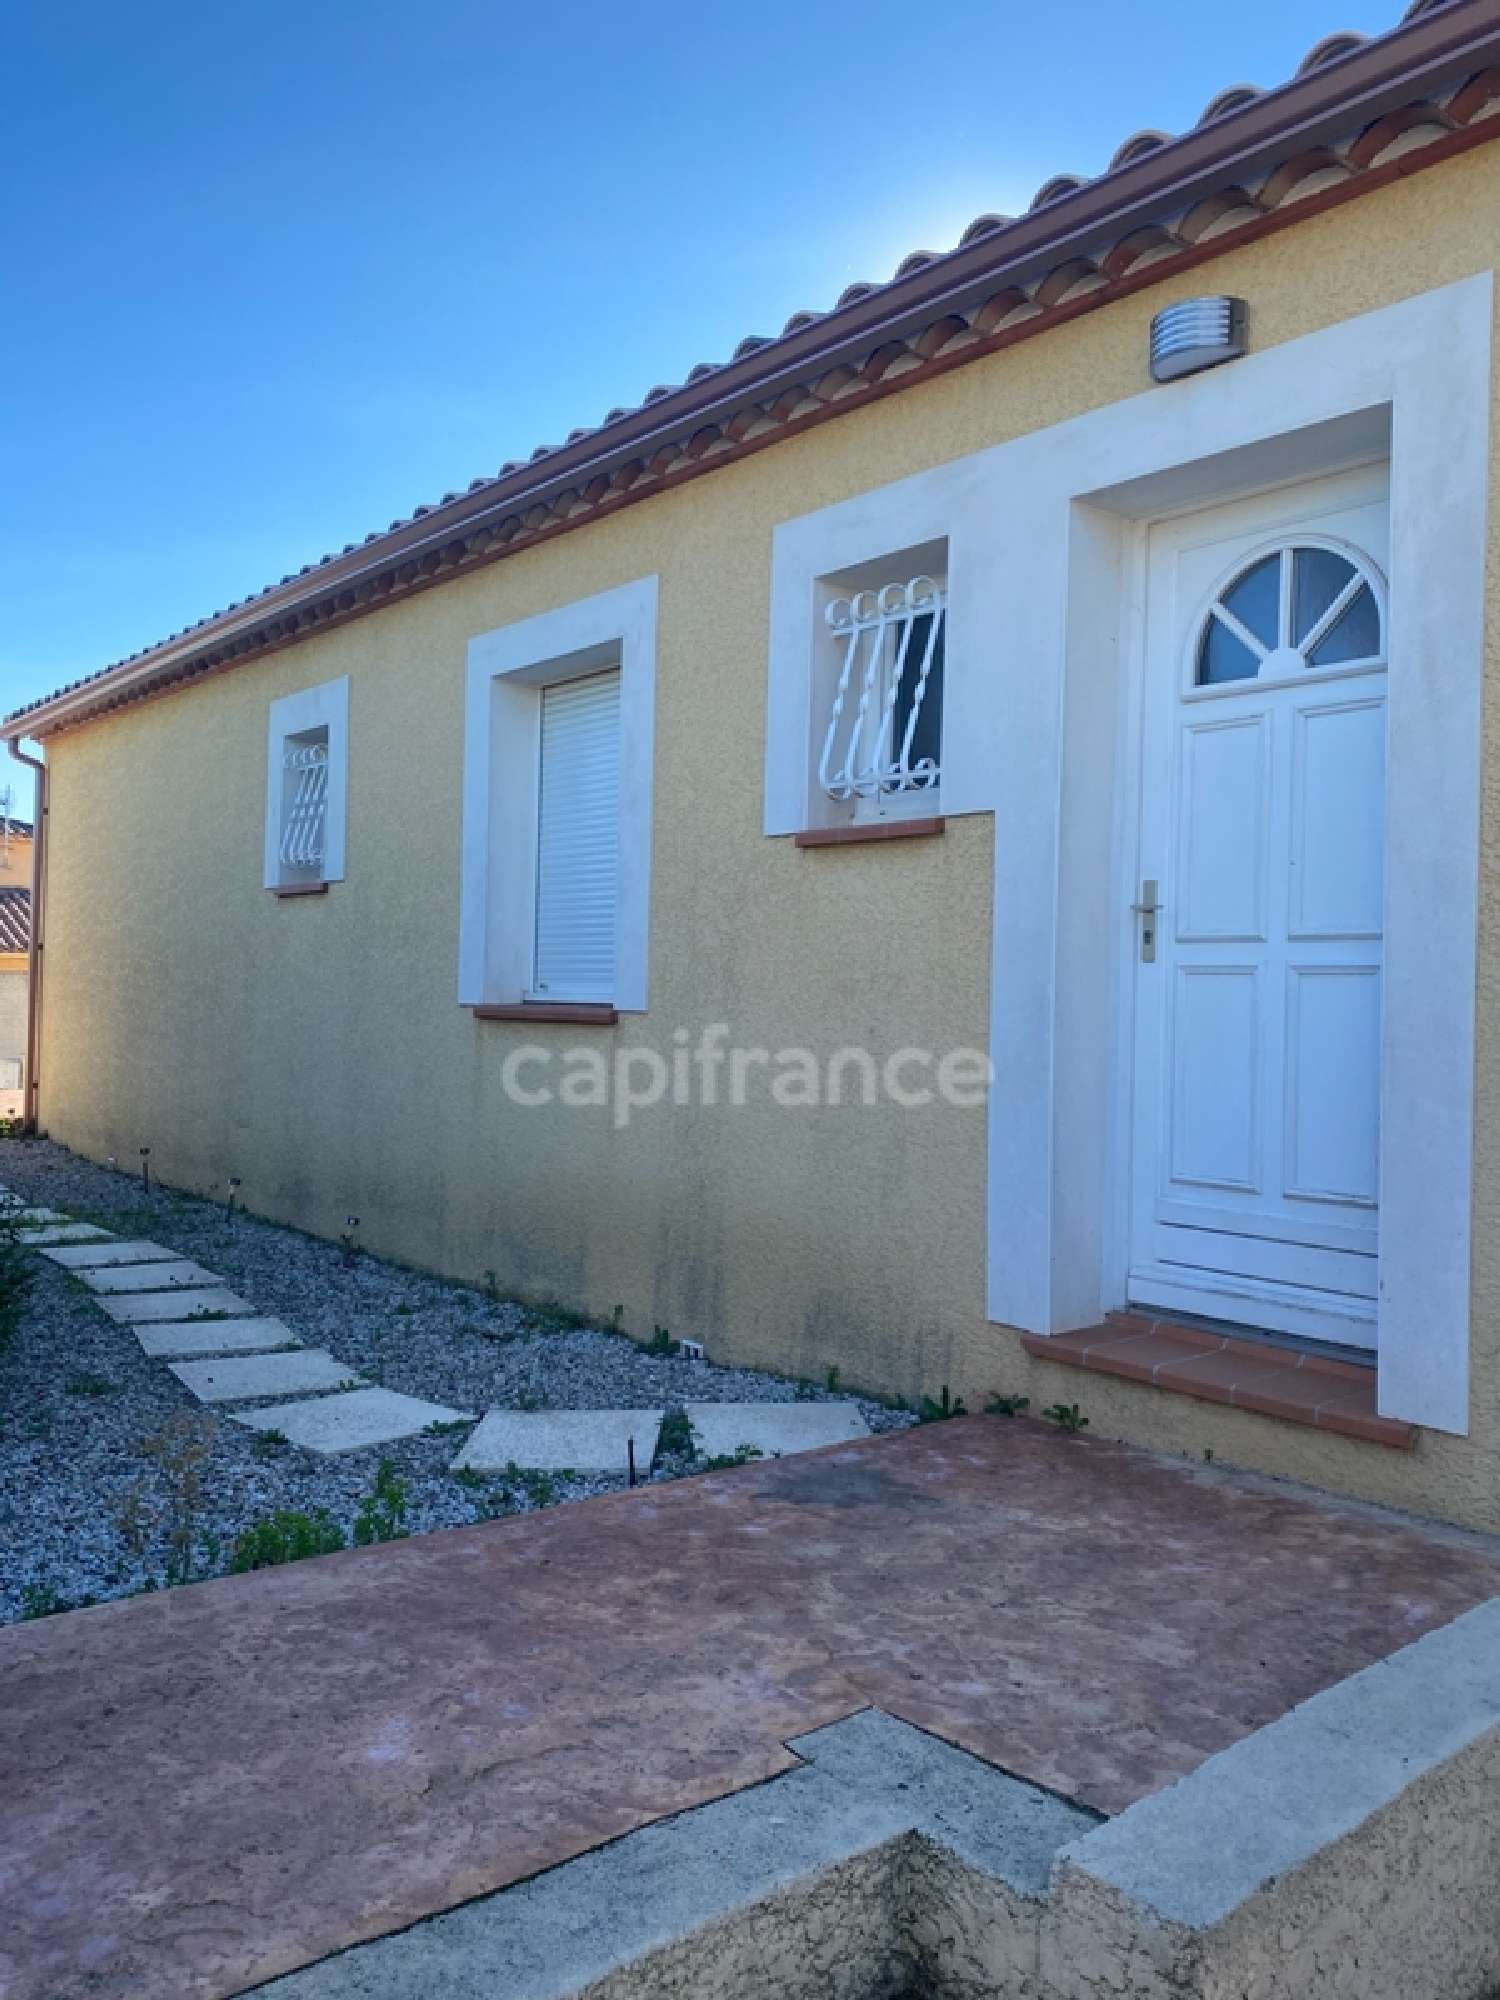  for sale house Coulobres Hérault 4